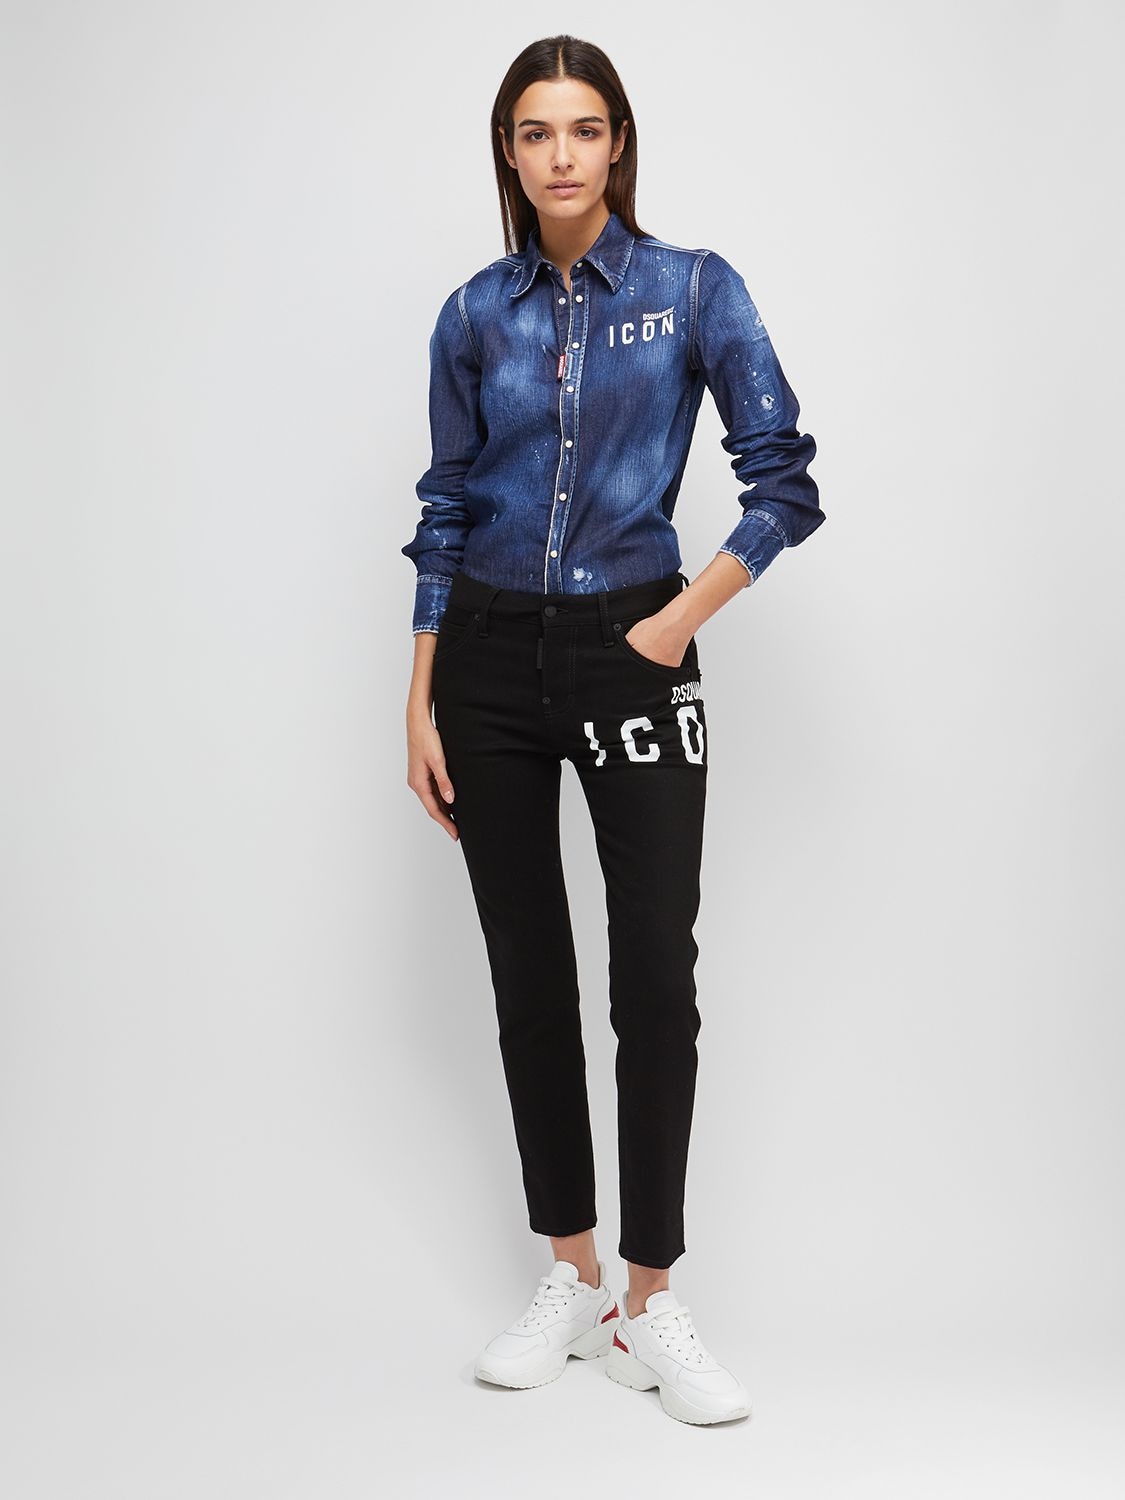 DSQUARED2 ICON COOL GIRL JEAN COTTON DENIM JEANS,74I07Y152-OTAW0